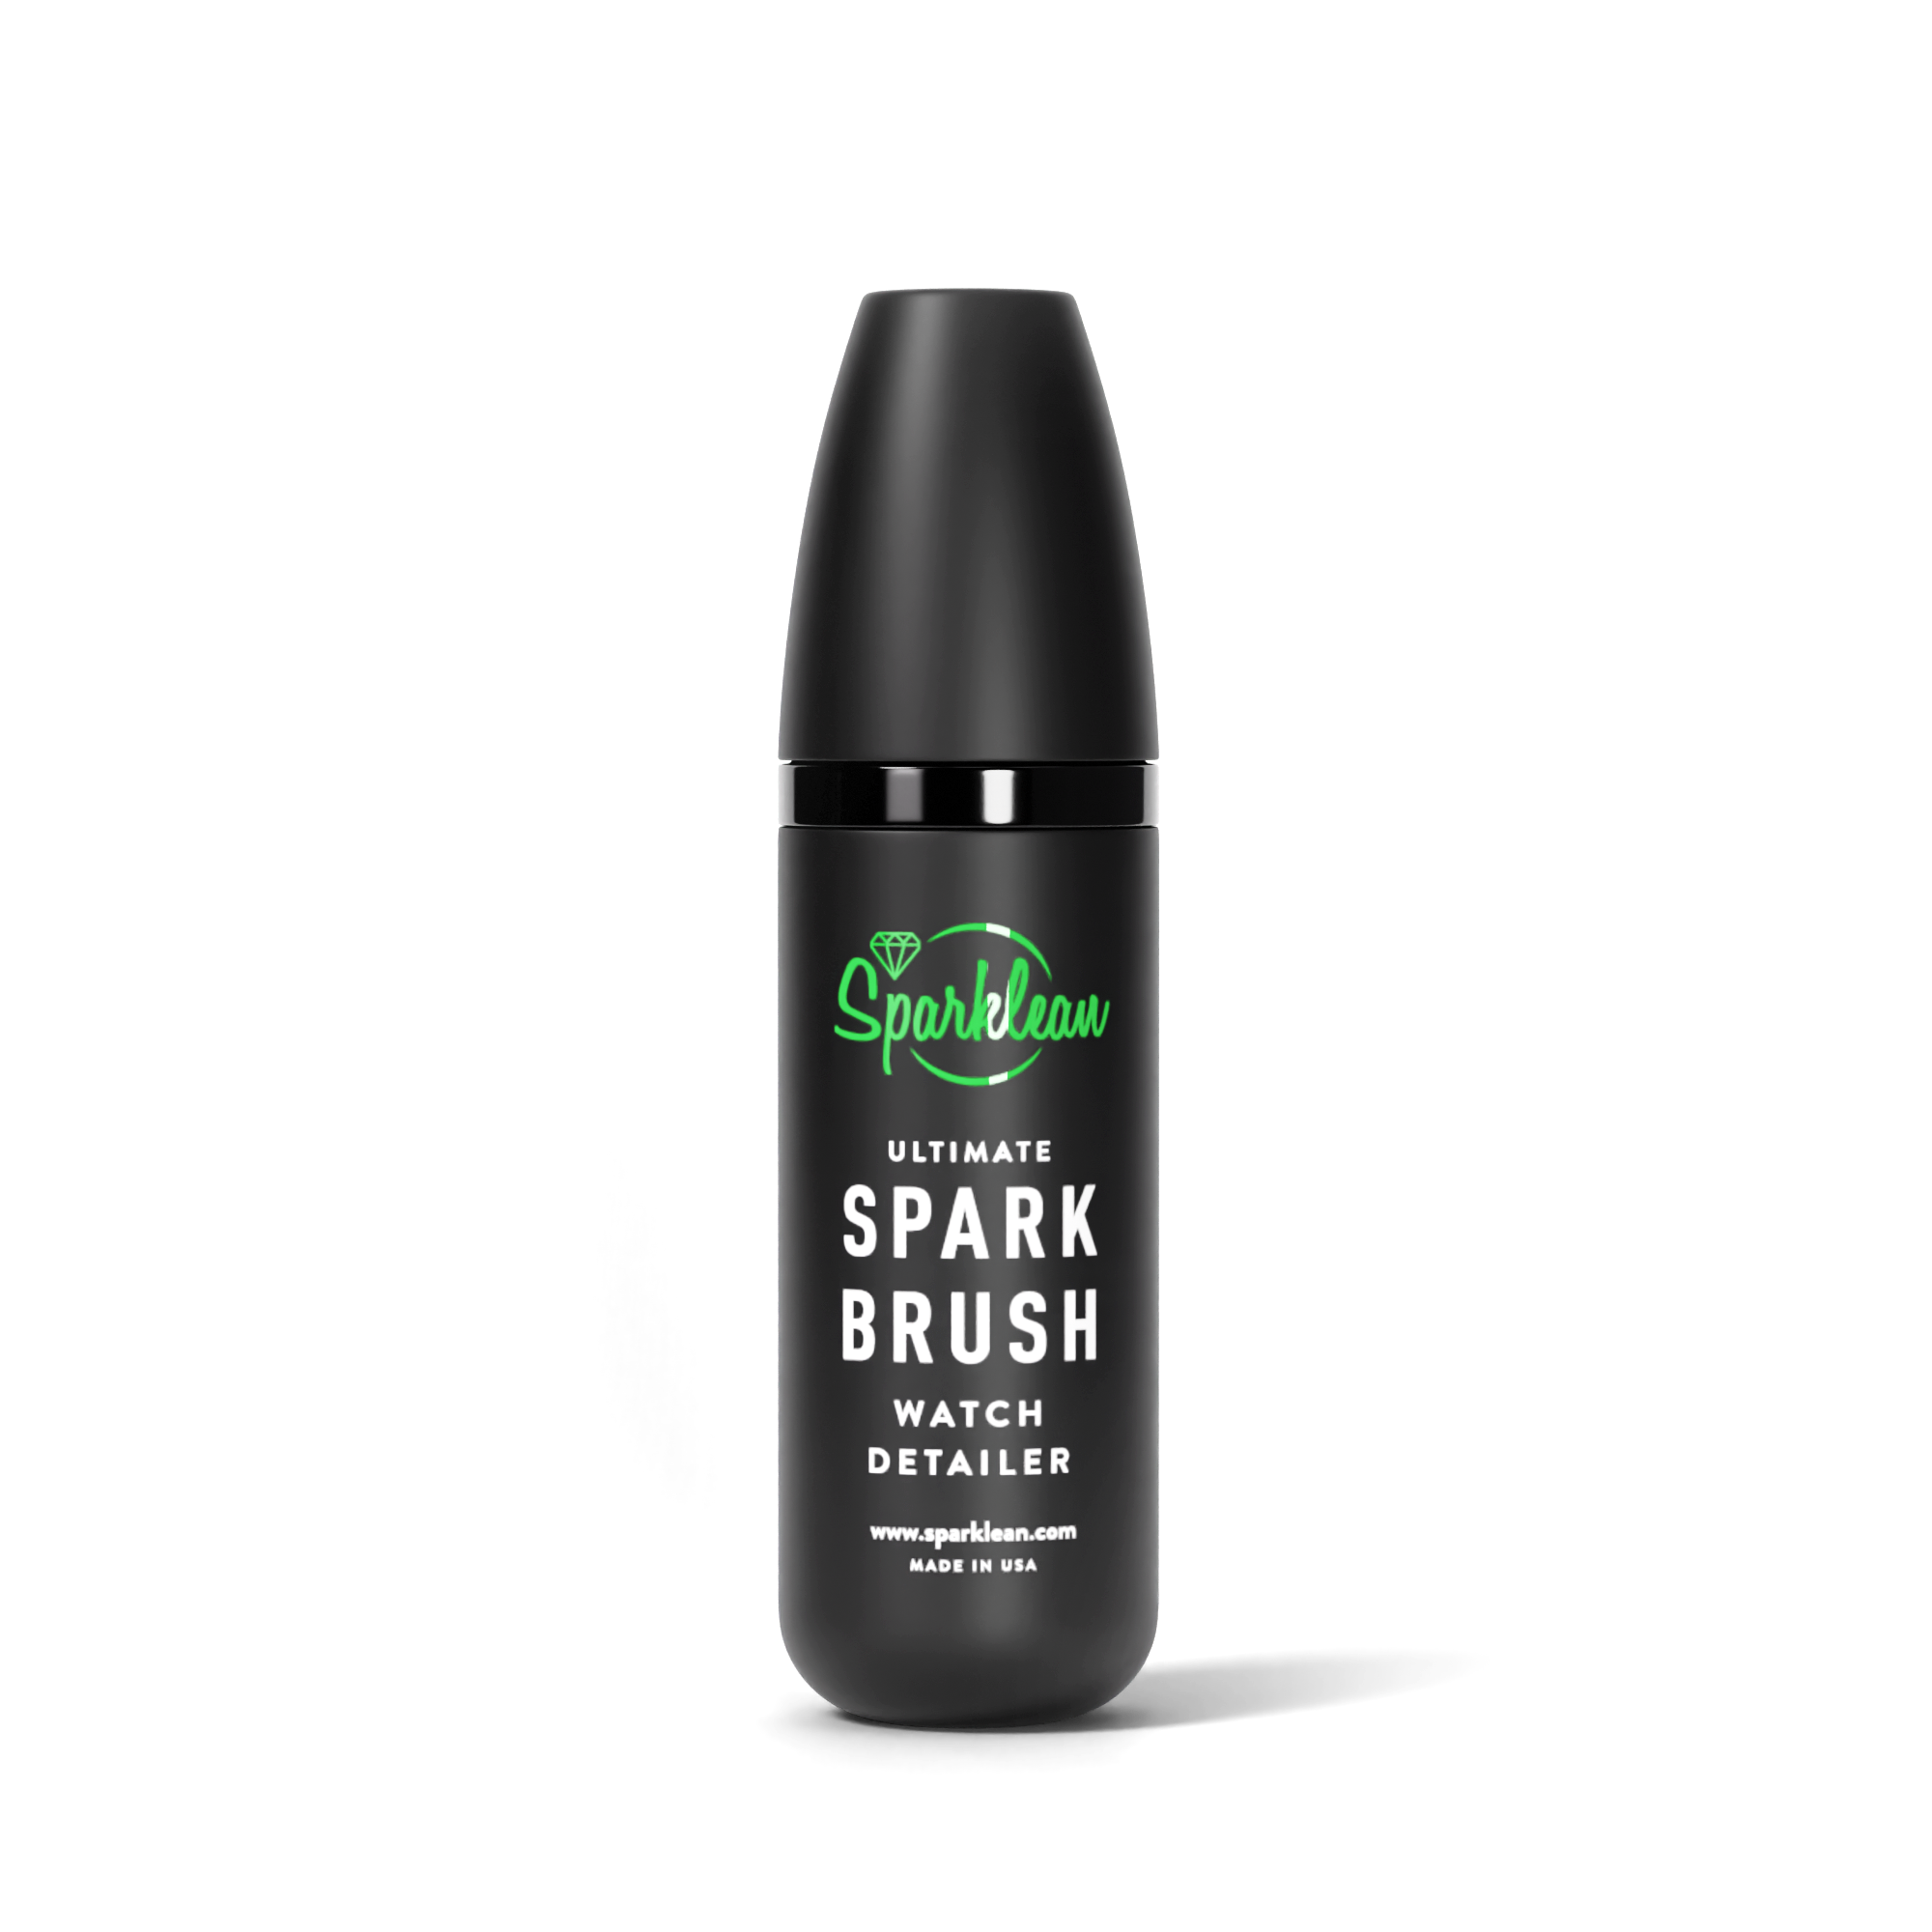 Sparklean SparkBrush: Universal Handheld Cleaner with Ultra-Soft Bristles – Eco-Friendly & Safe for All Types of Metal and Jewelry